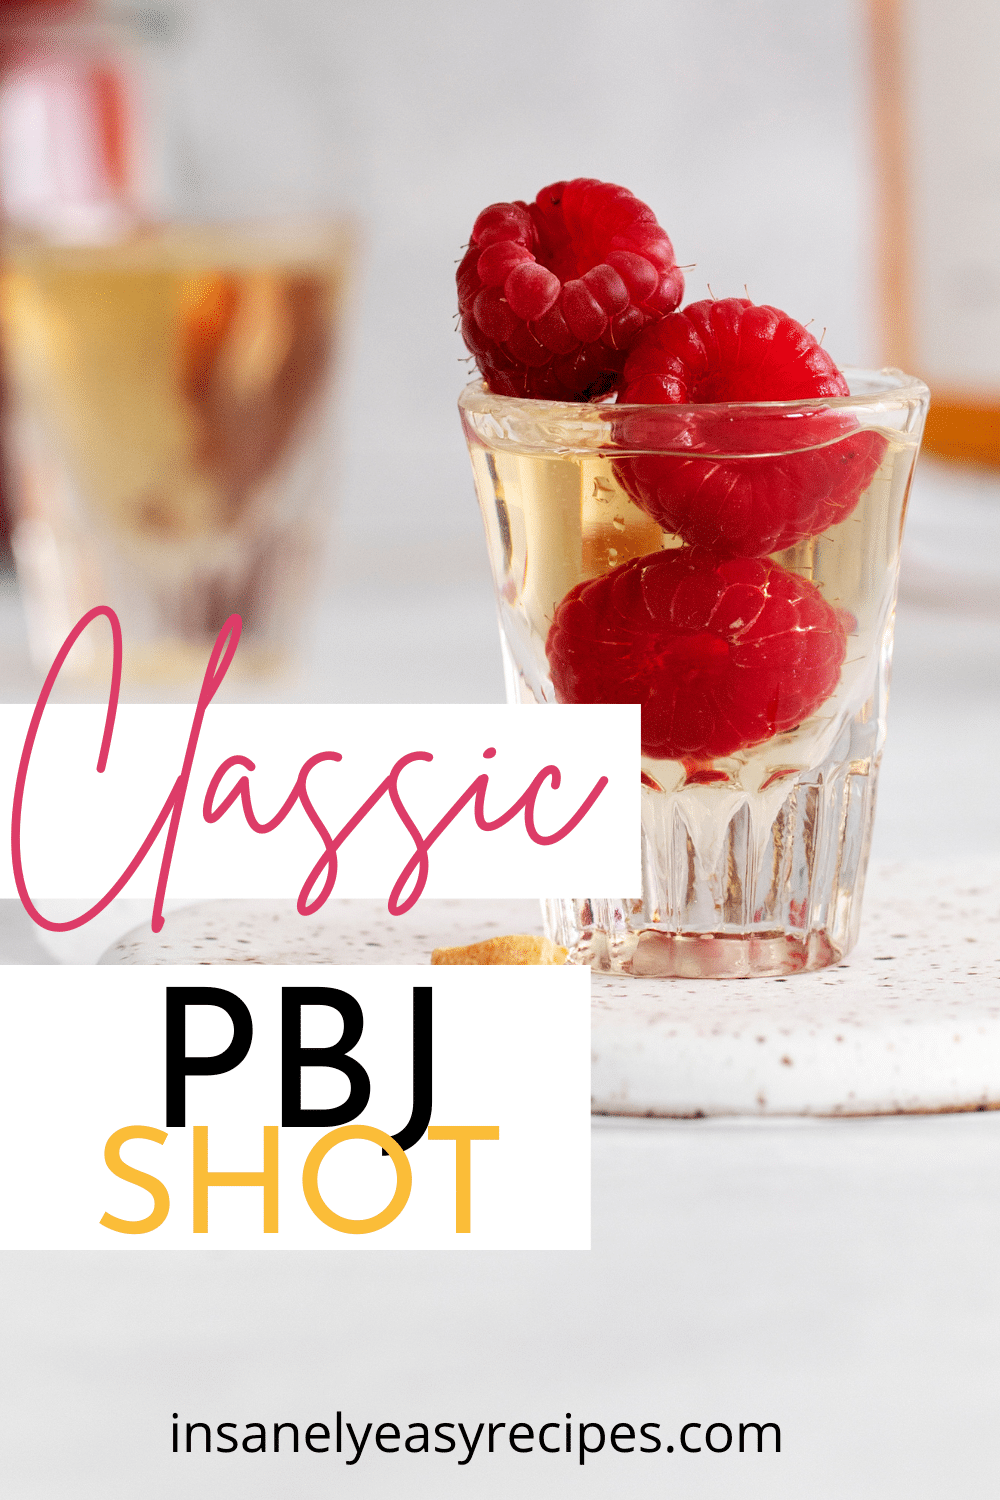 a PBJ shot with a skewer of fresh raspberries in it. Text overlay says "classic PBJ Shot"